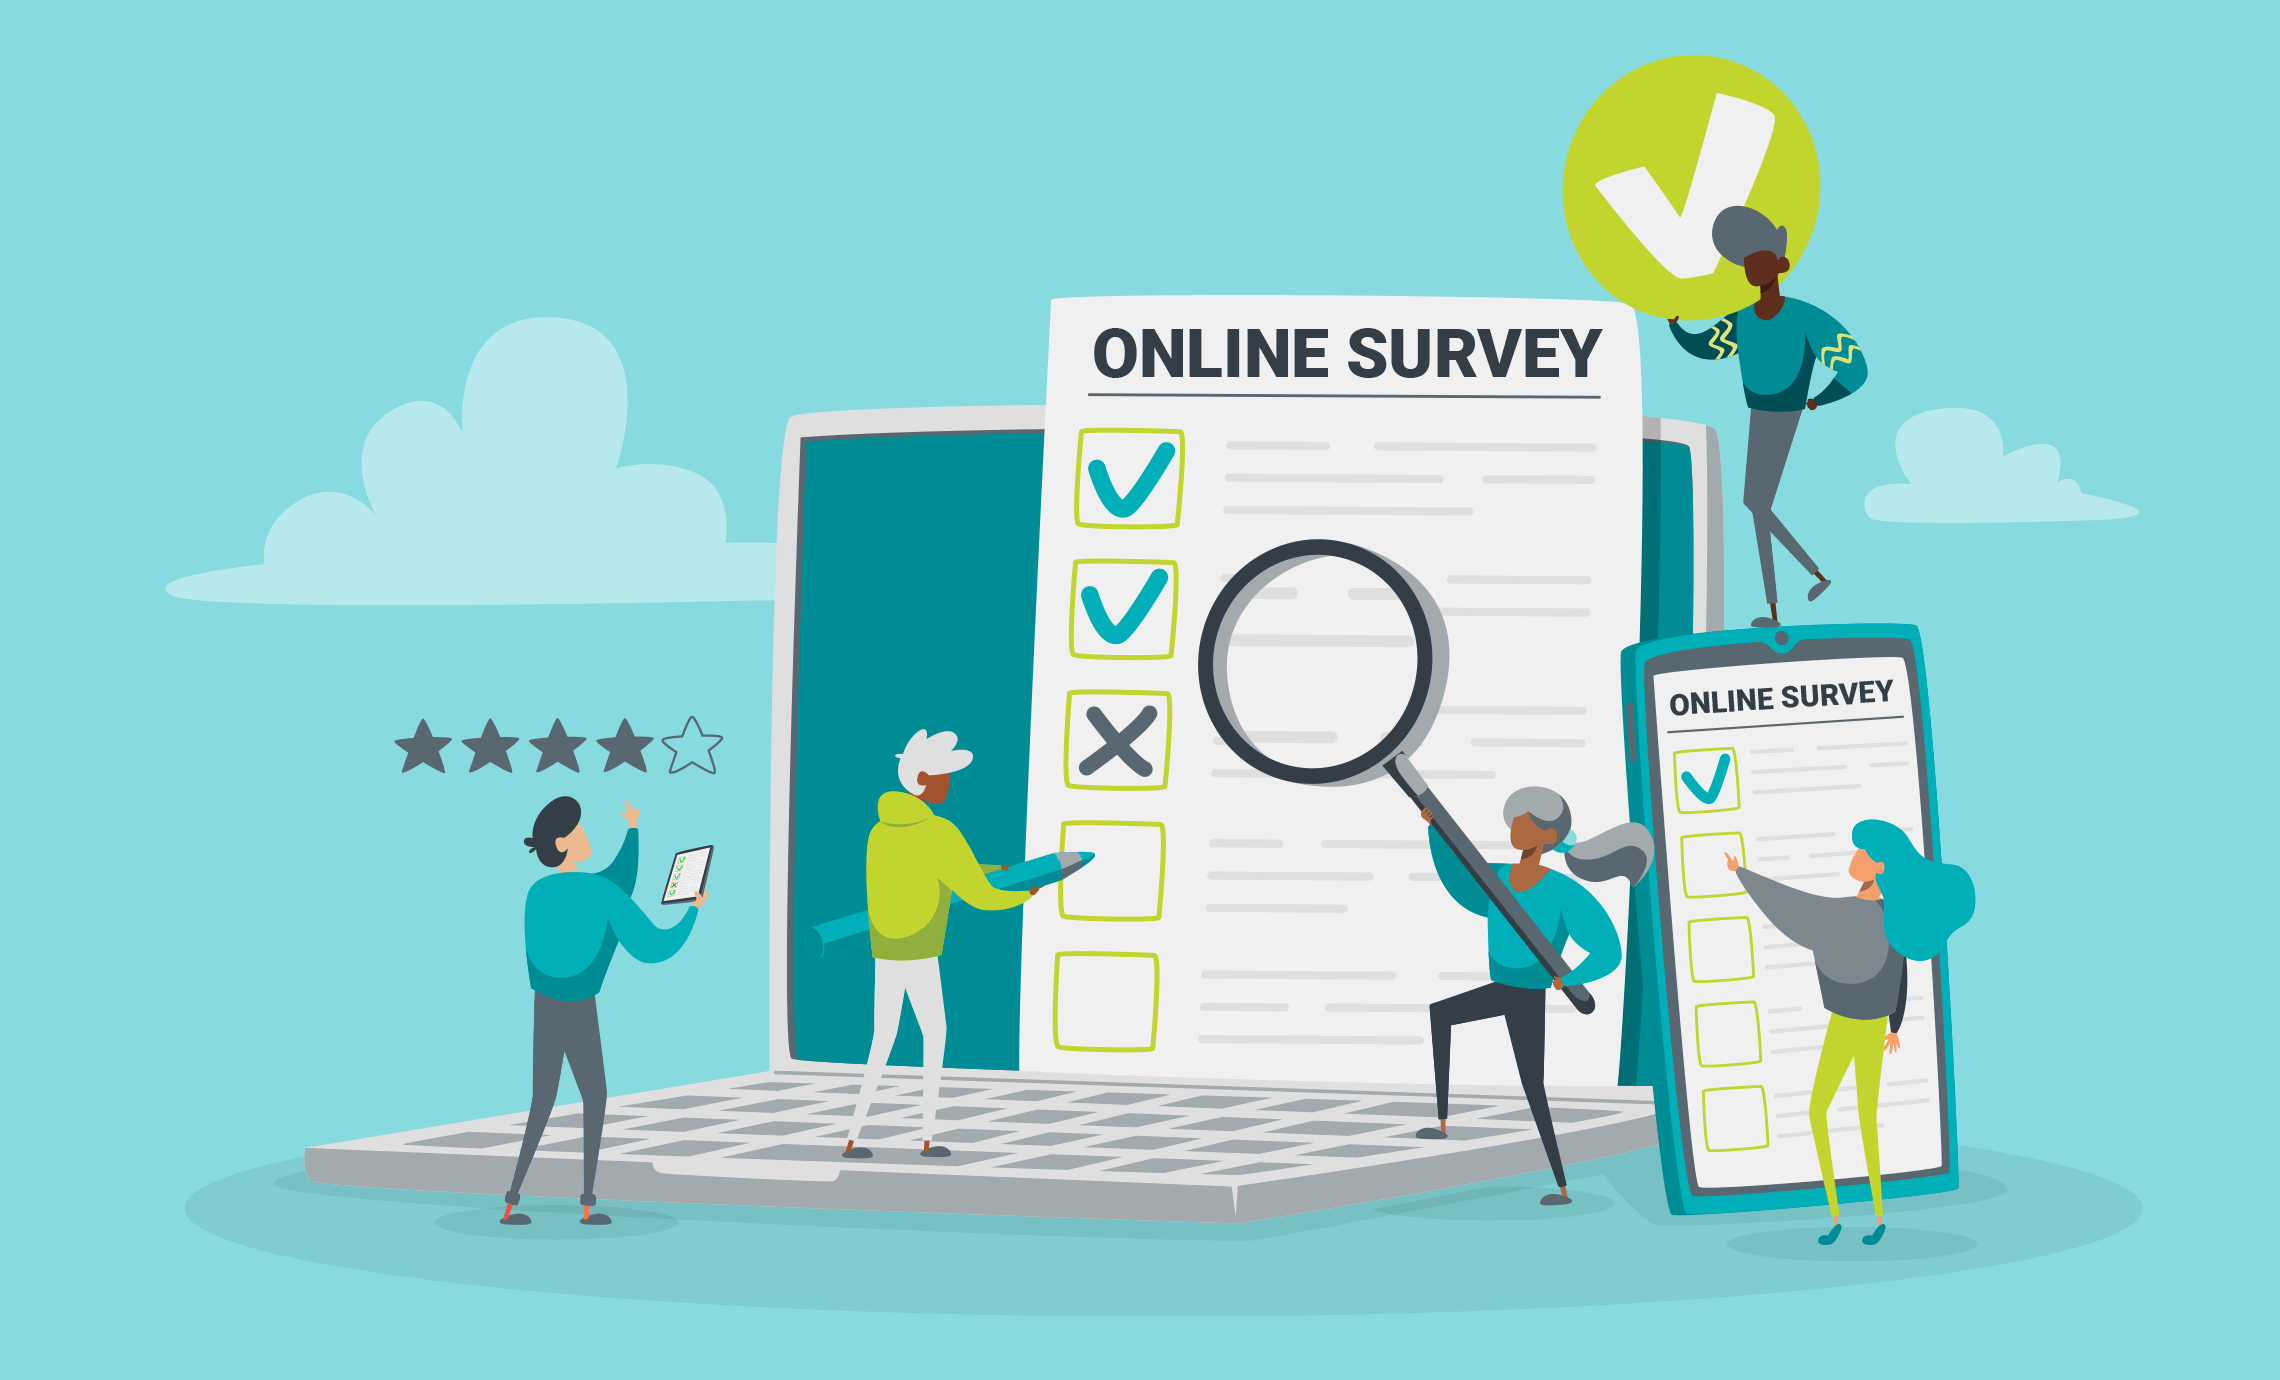 Top questions to ask attendees and sponsors in your association’s post-event survey